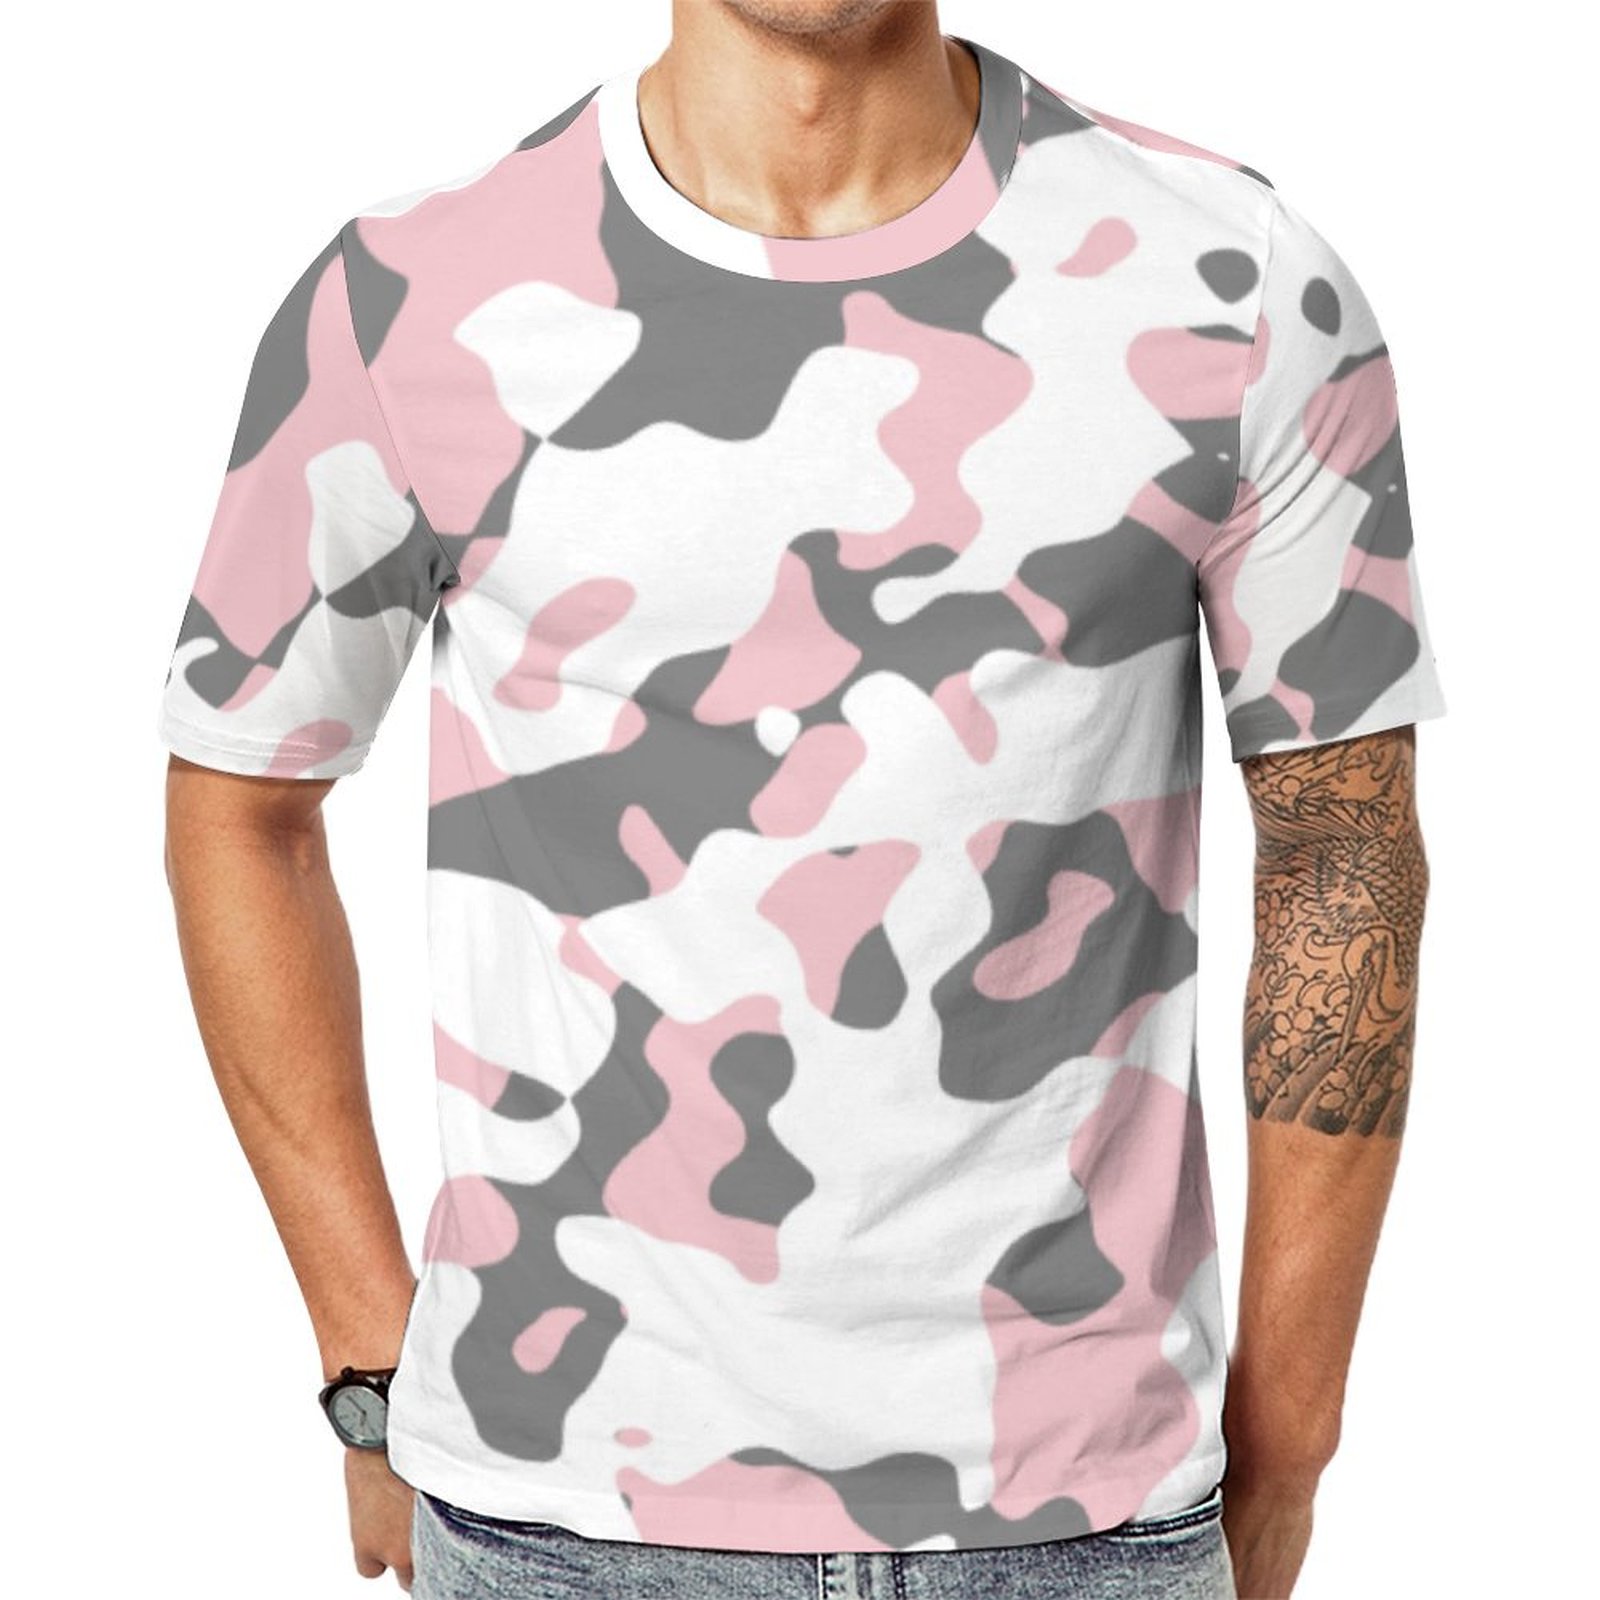 Girly Pink Camo Gray White Camouflage Short Sleeve Print Unisex Tshirt Summer Casual Tees for Men and Women Coolcoshirts